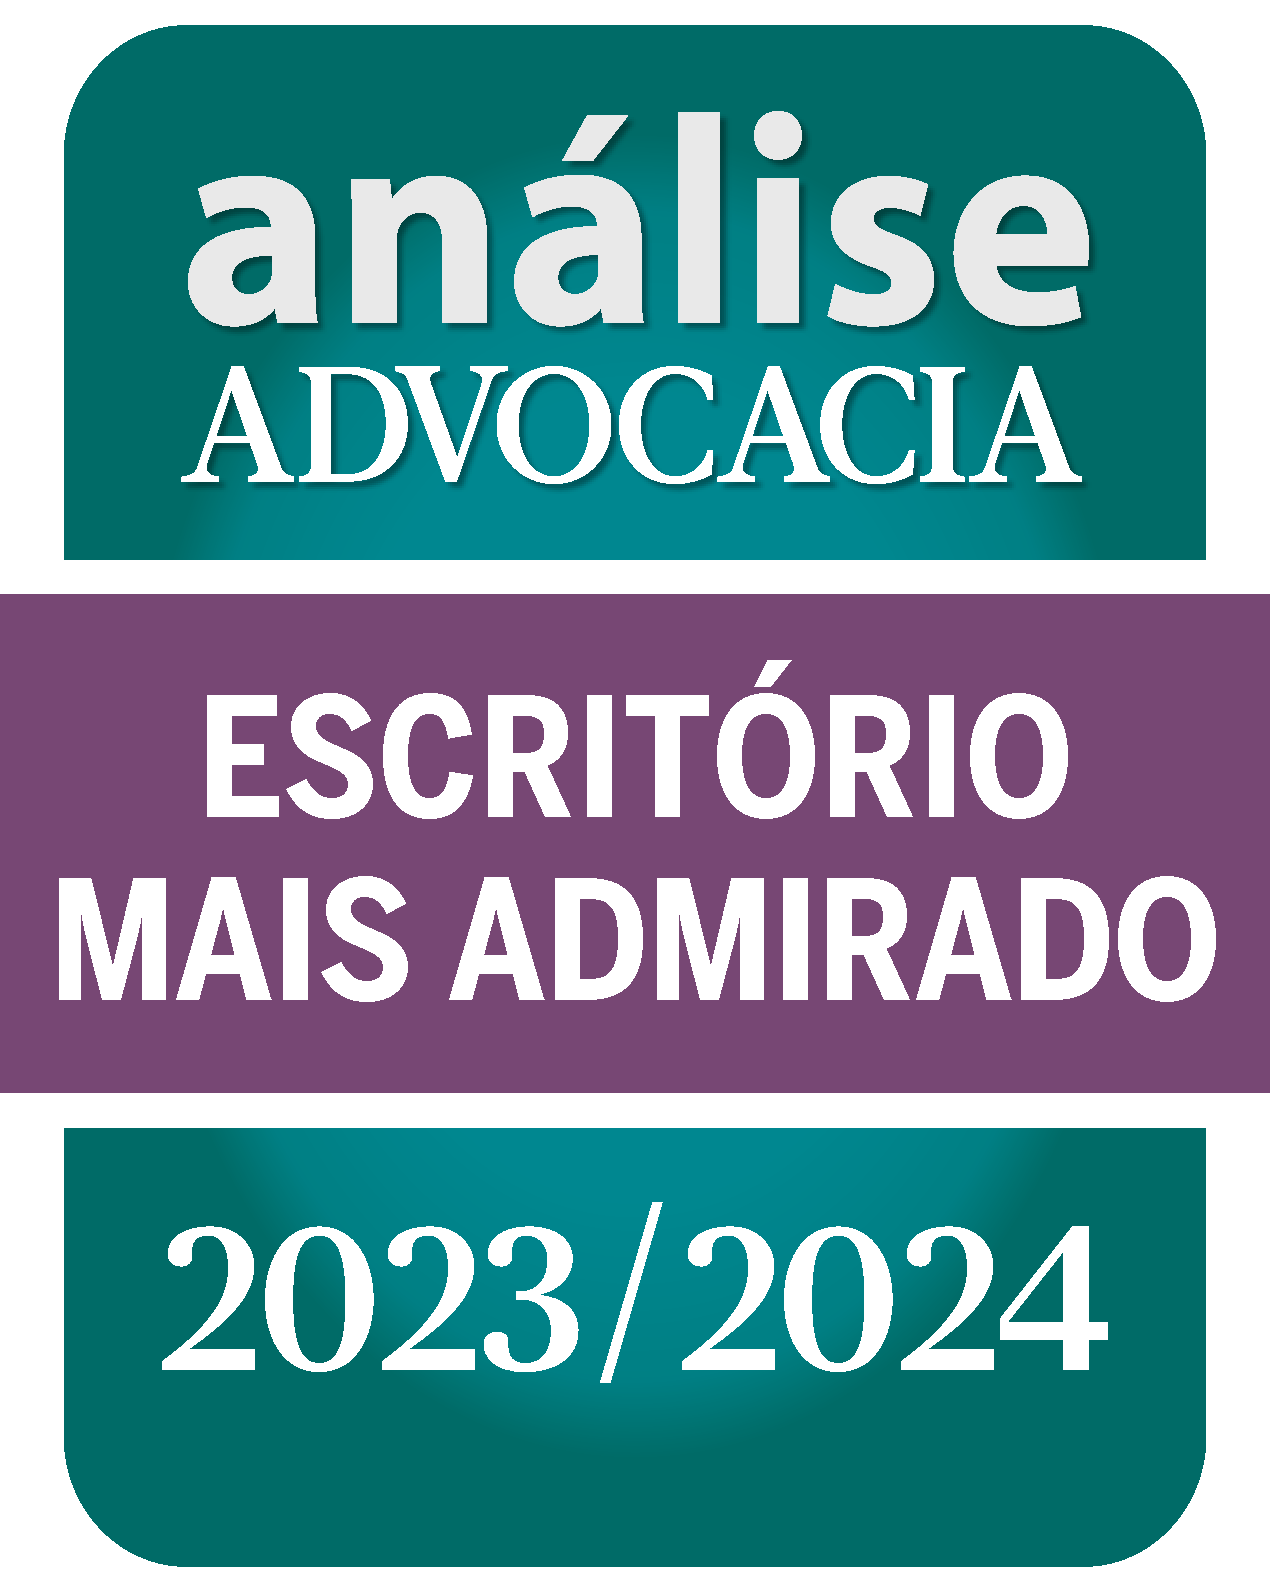 Análise Advocacia Most Admired Law Office - 2023/2024